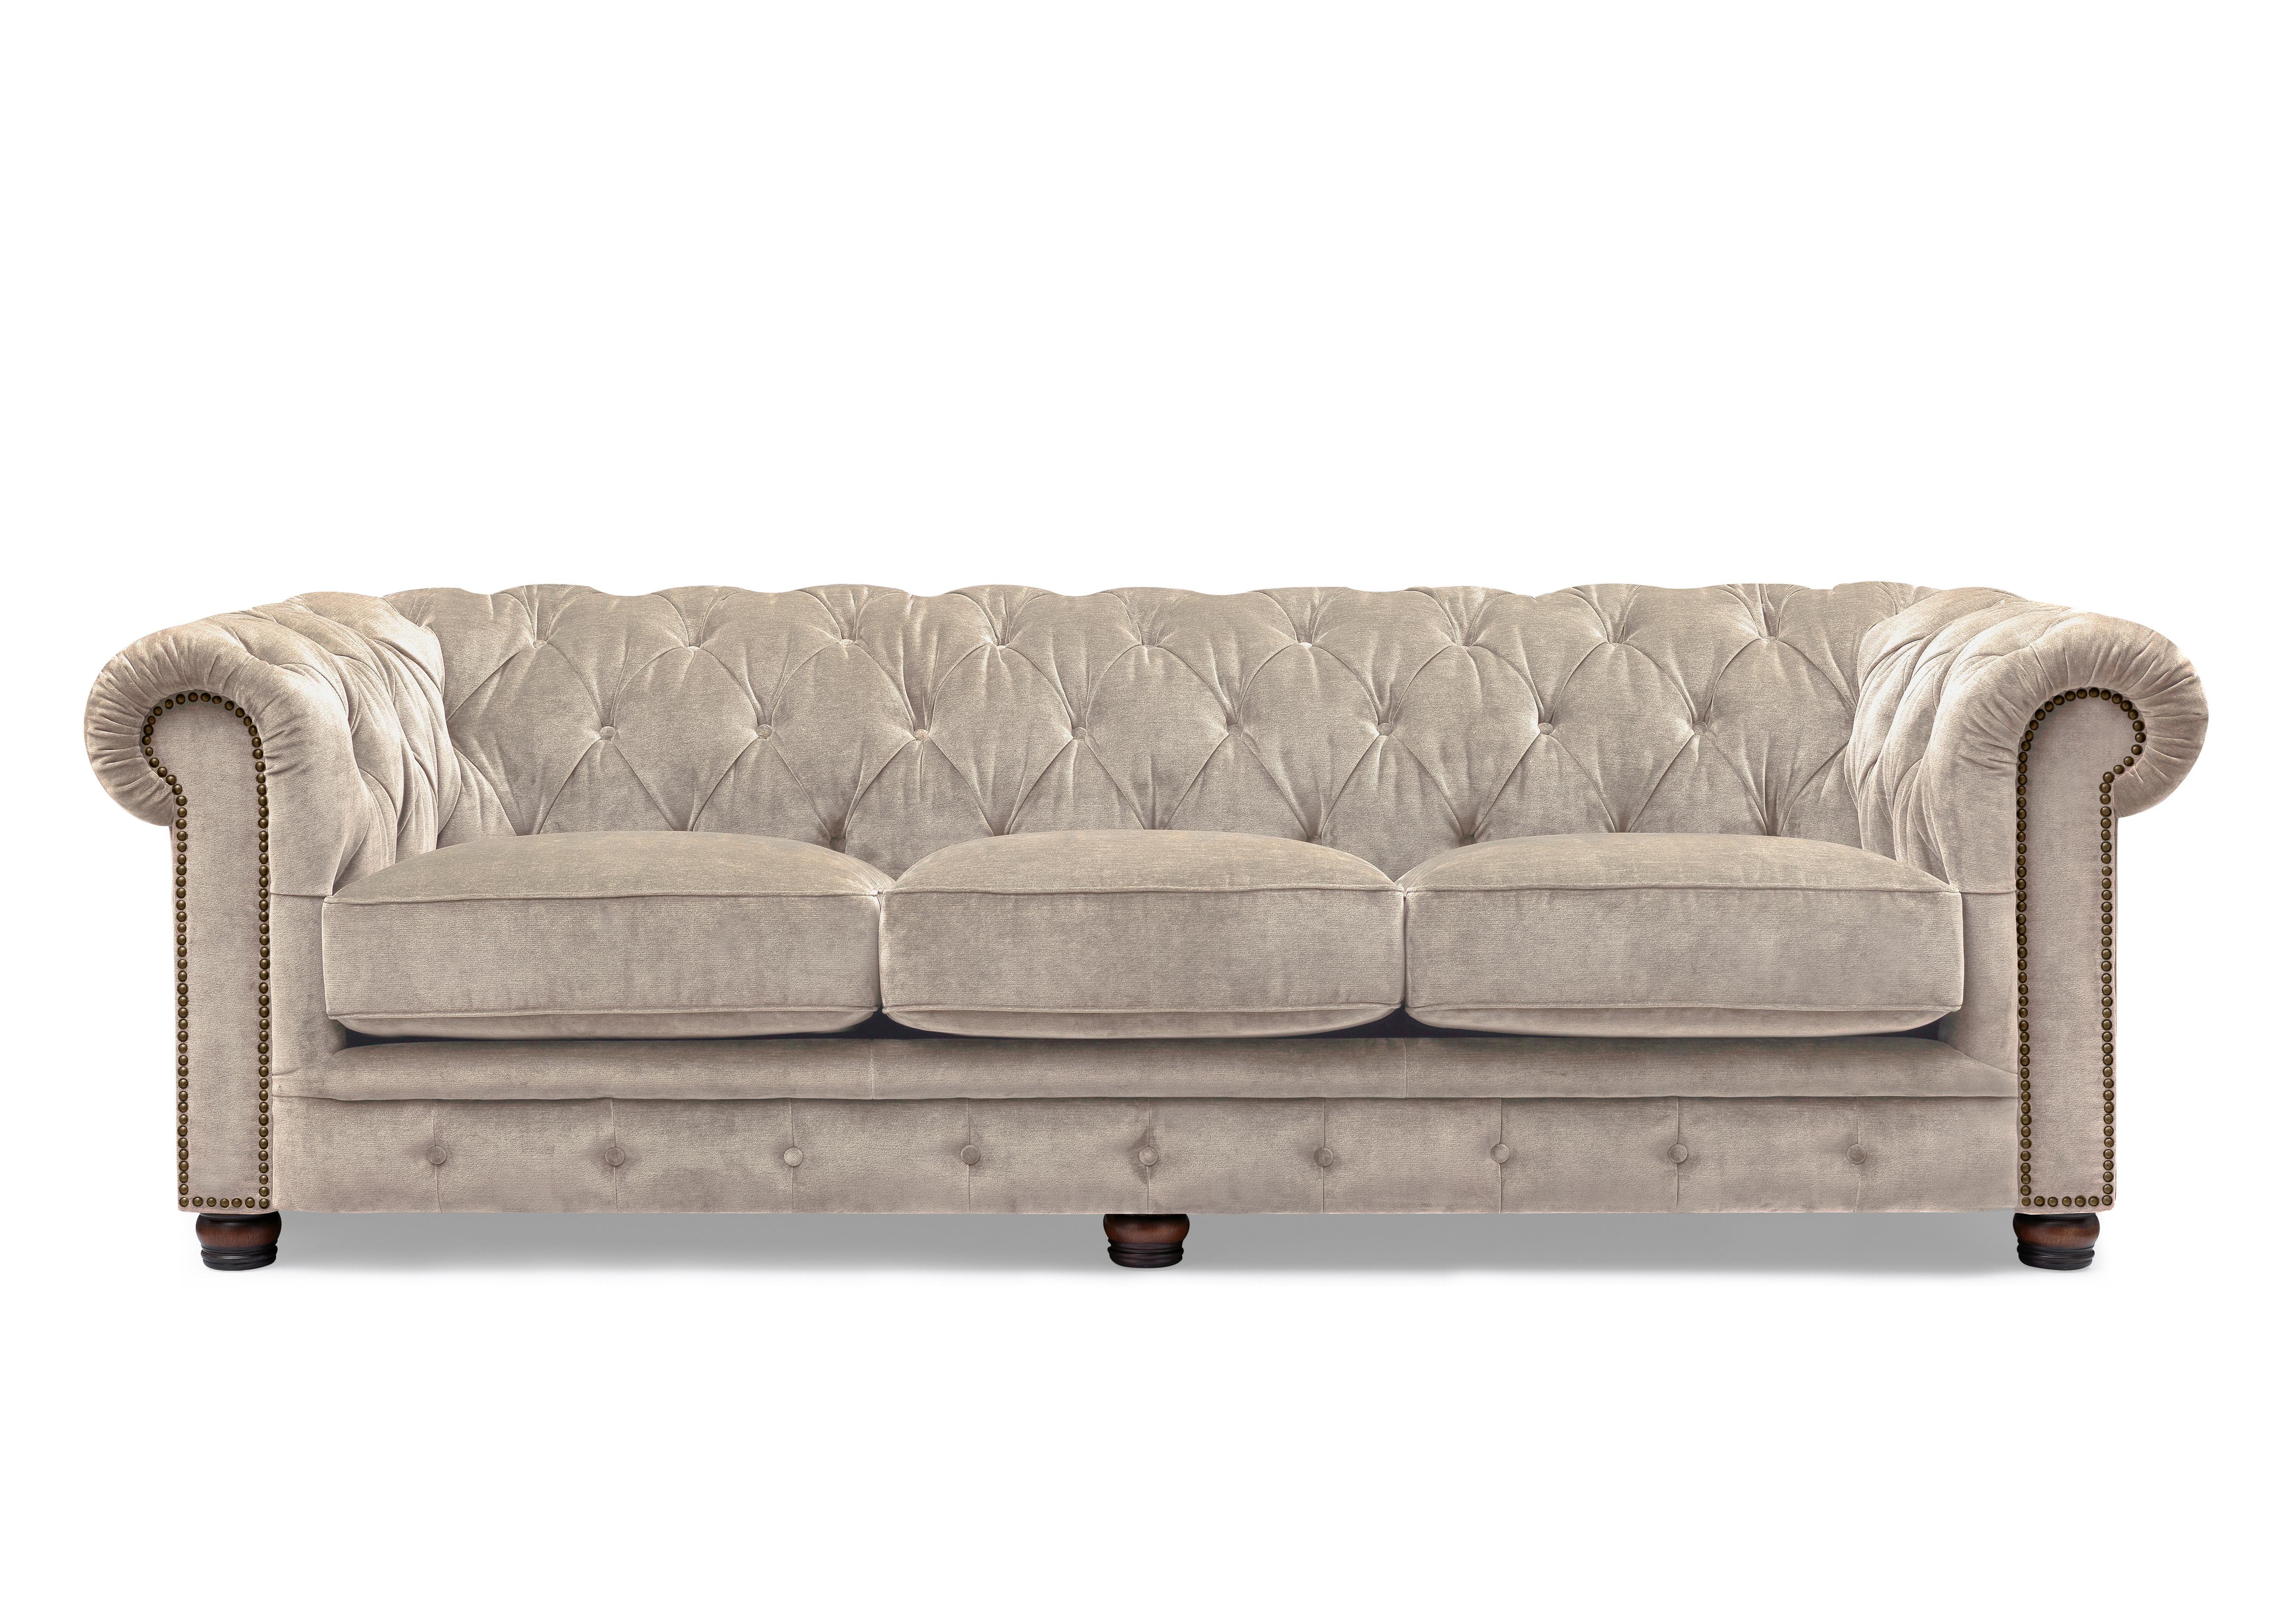 Shackleton 4 Seater Fabric Chesterfield Sofa with USB-C in X3y1-W022 Barley on Furniture Village